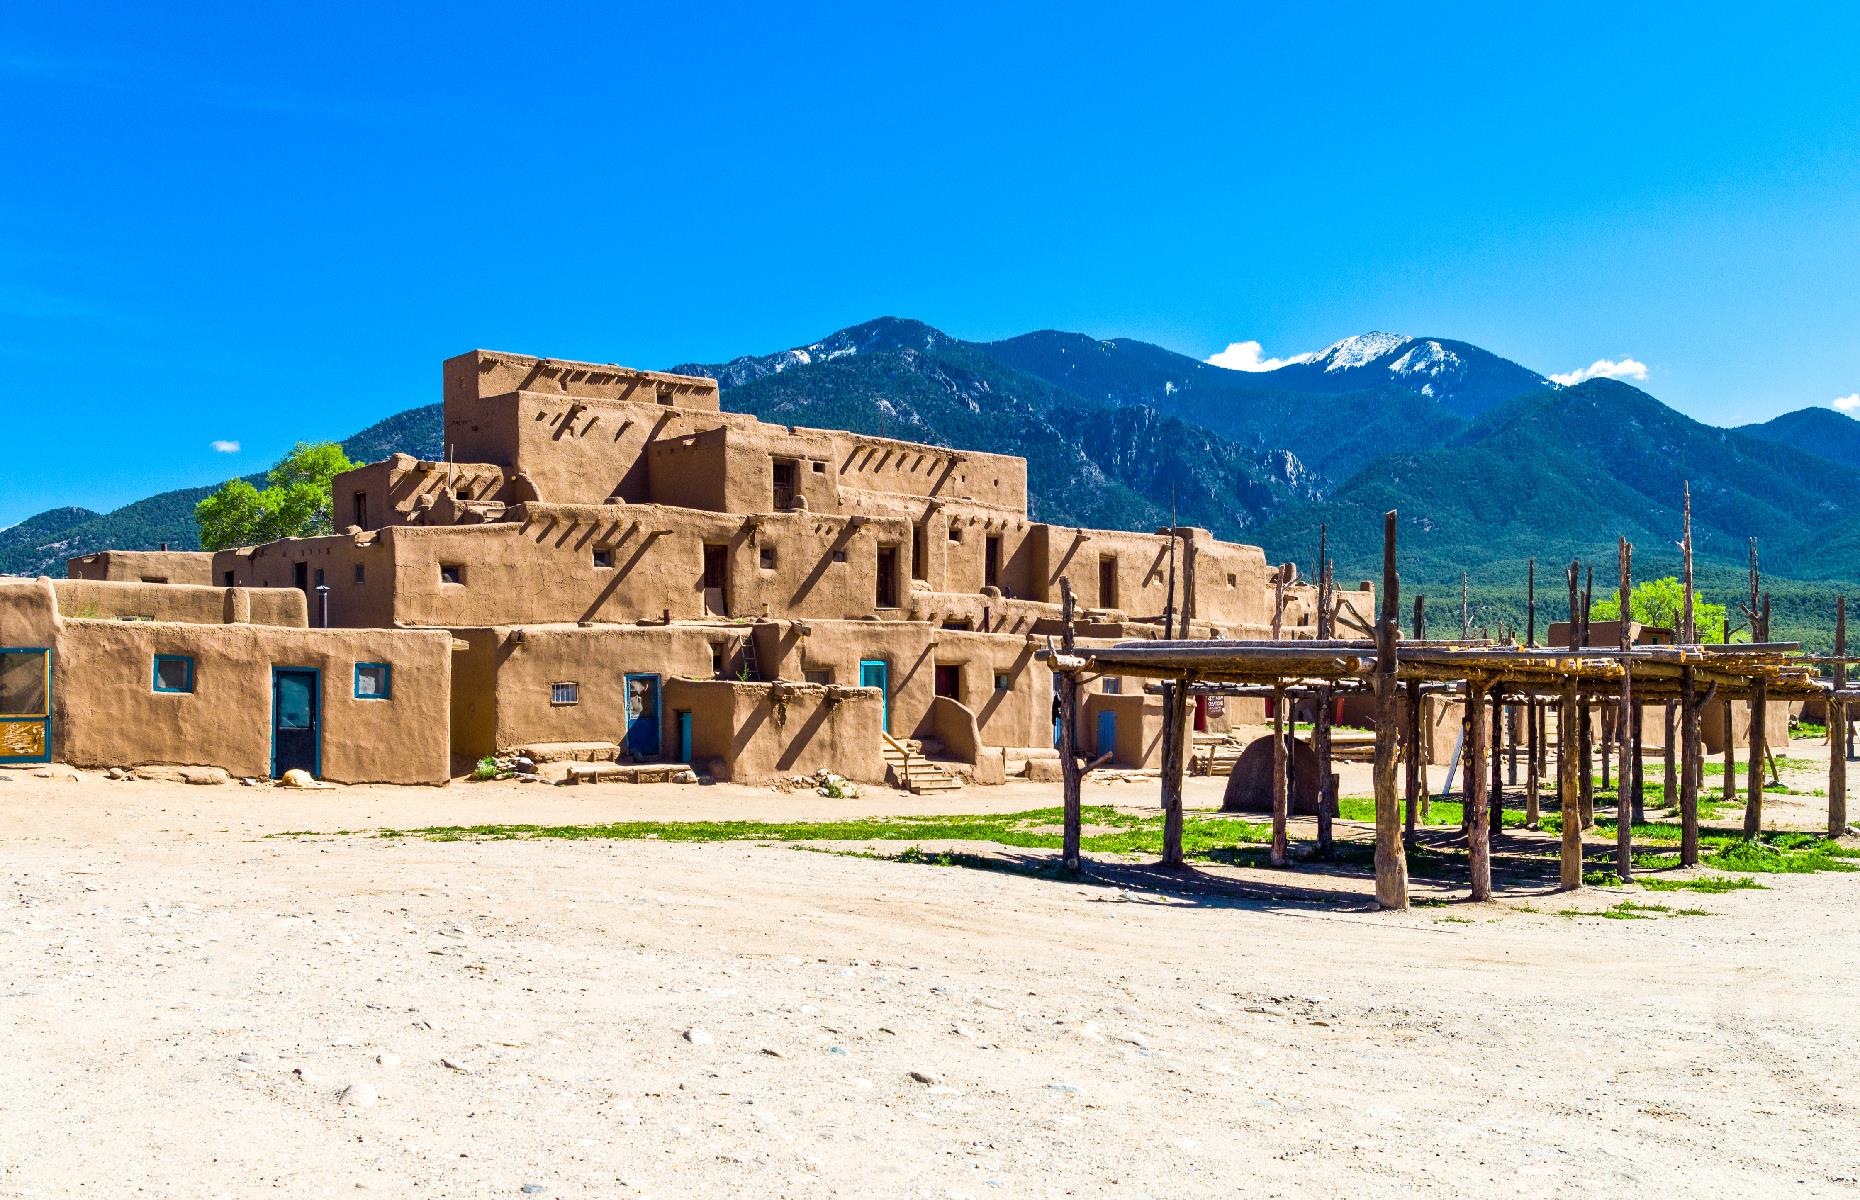 <p><a href="https://taospueblo.com">Taos Pueblo</a> is recognizable for its sun-baked adobe buildings, watched over by Taos Mountains. The site is thought to have been inhabited for around a thousand years and it is still home to an indigenous community of around 150 people. Visitors can typically come to explore the pueblo, speak to members of the community and purchase handmade souvenirs including jewelry, pottery and fine artworks. The settlement is currently closed to the public – check the website for updates.</p>